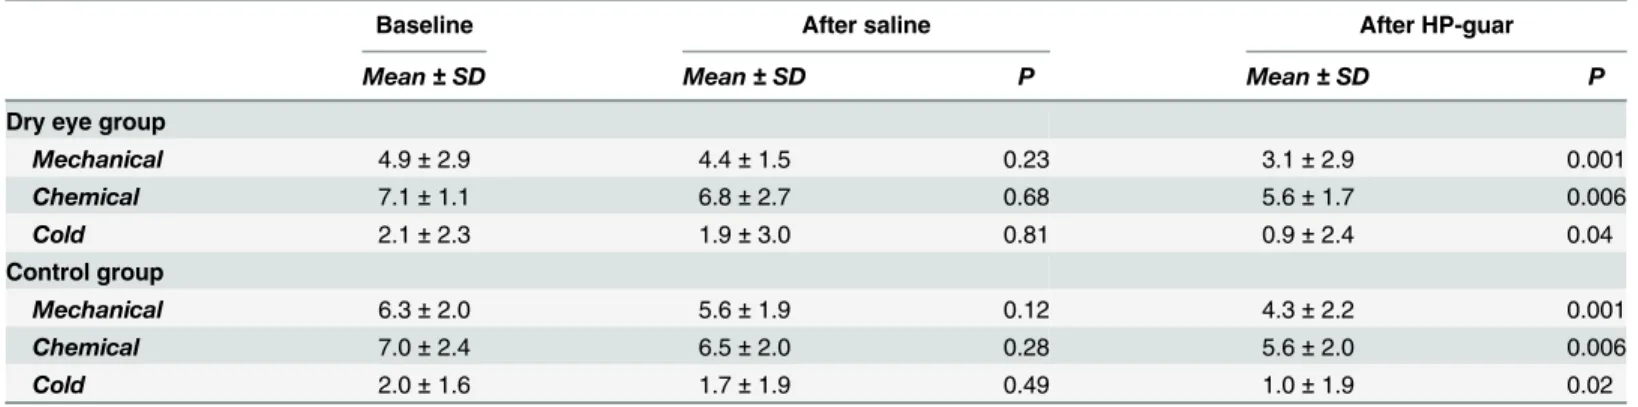 Fig 2 demonstrates the mean decrease in irritation scores to selective mechanical, cold and chemical stimulation after tear supplementation in the dry eye group.